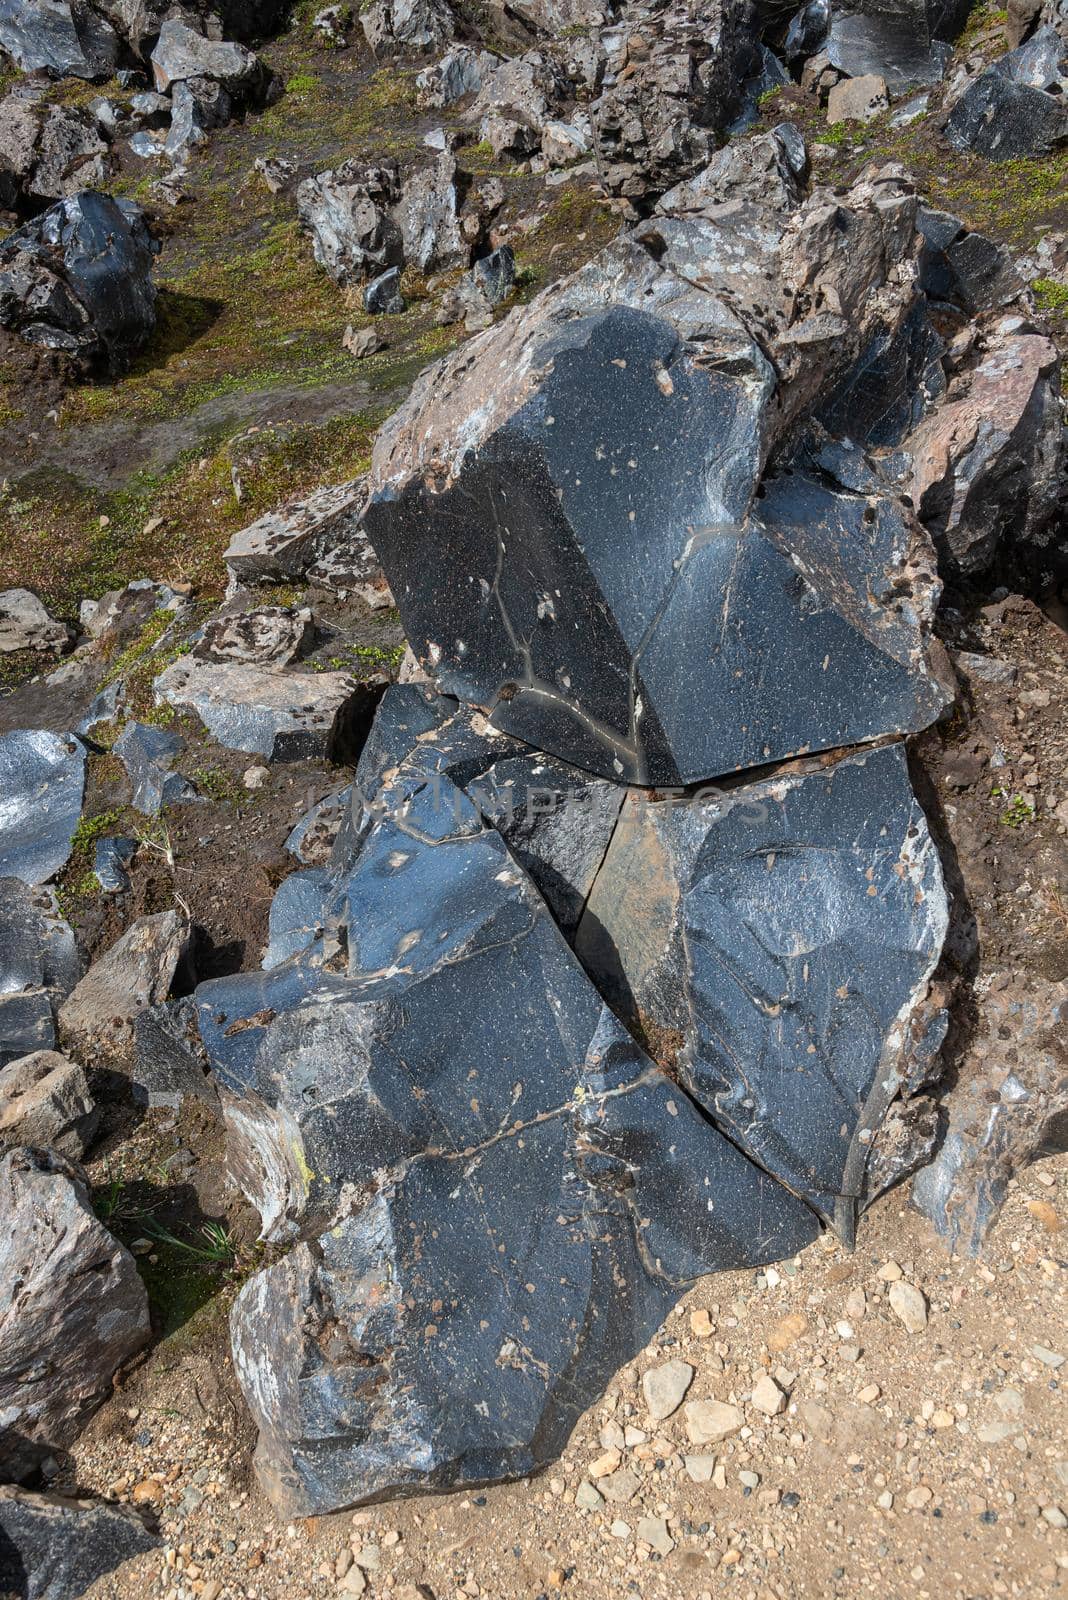 Volcanic glass rock known as obsidian found in lava fields formed by polymerized magma during volcanic eruption in rhyolitic silica, Iceland by neurobite